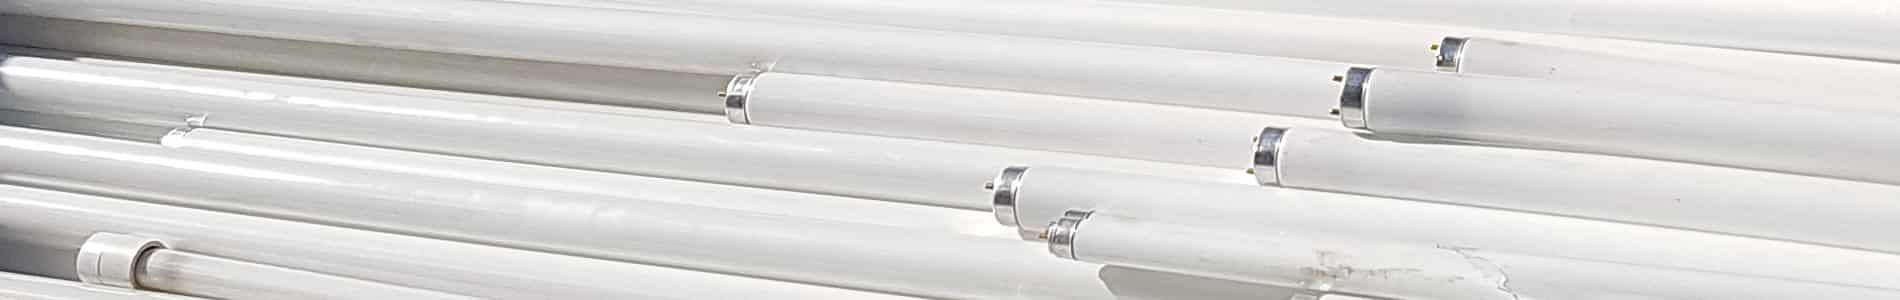 Fluorescent Light Tube Recycling